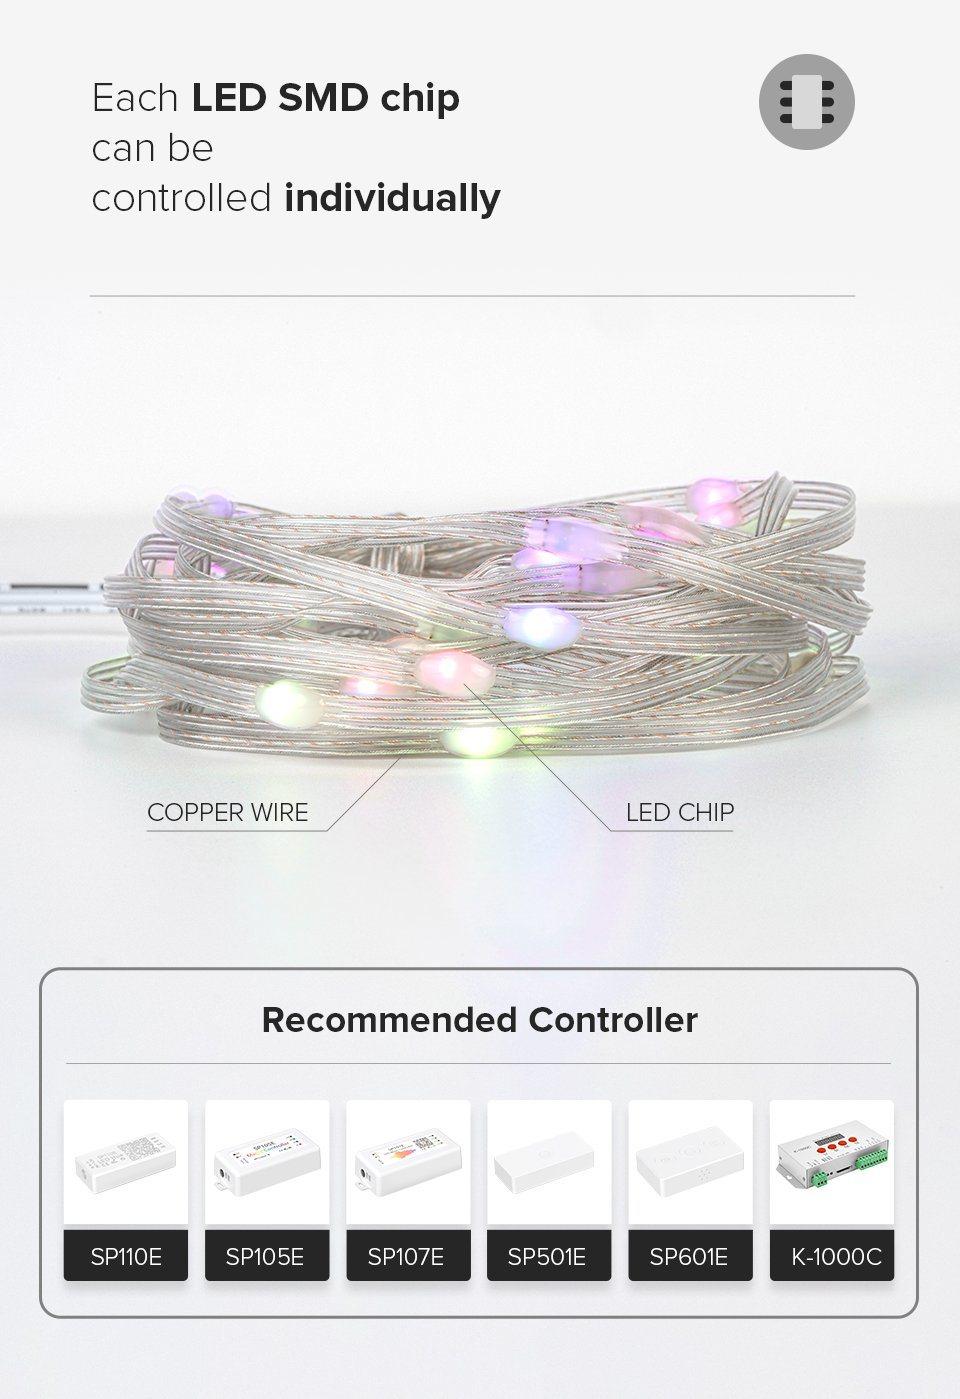 Waterproof LED Solar Copper Wire Christmas Tree Lights Holiday Lighting Star Fairy String Lights Outdoor Garden Decoration